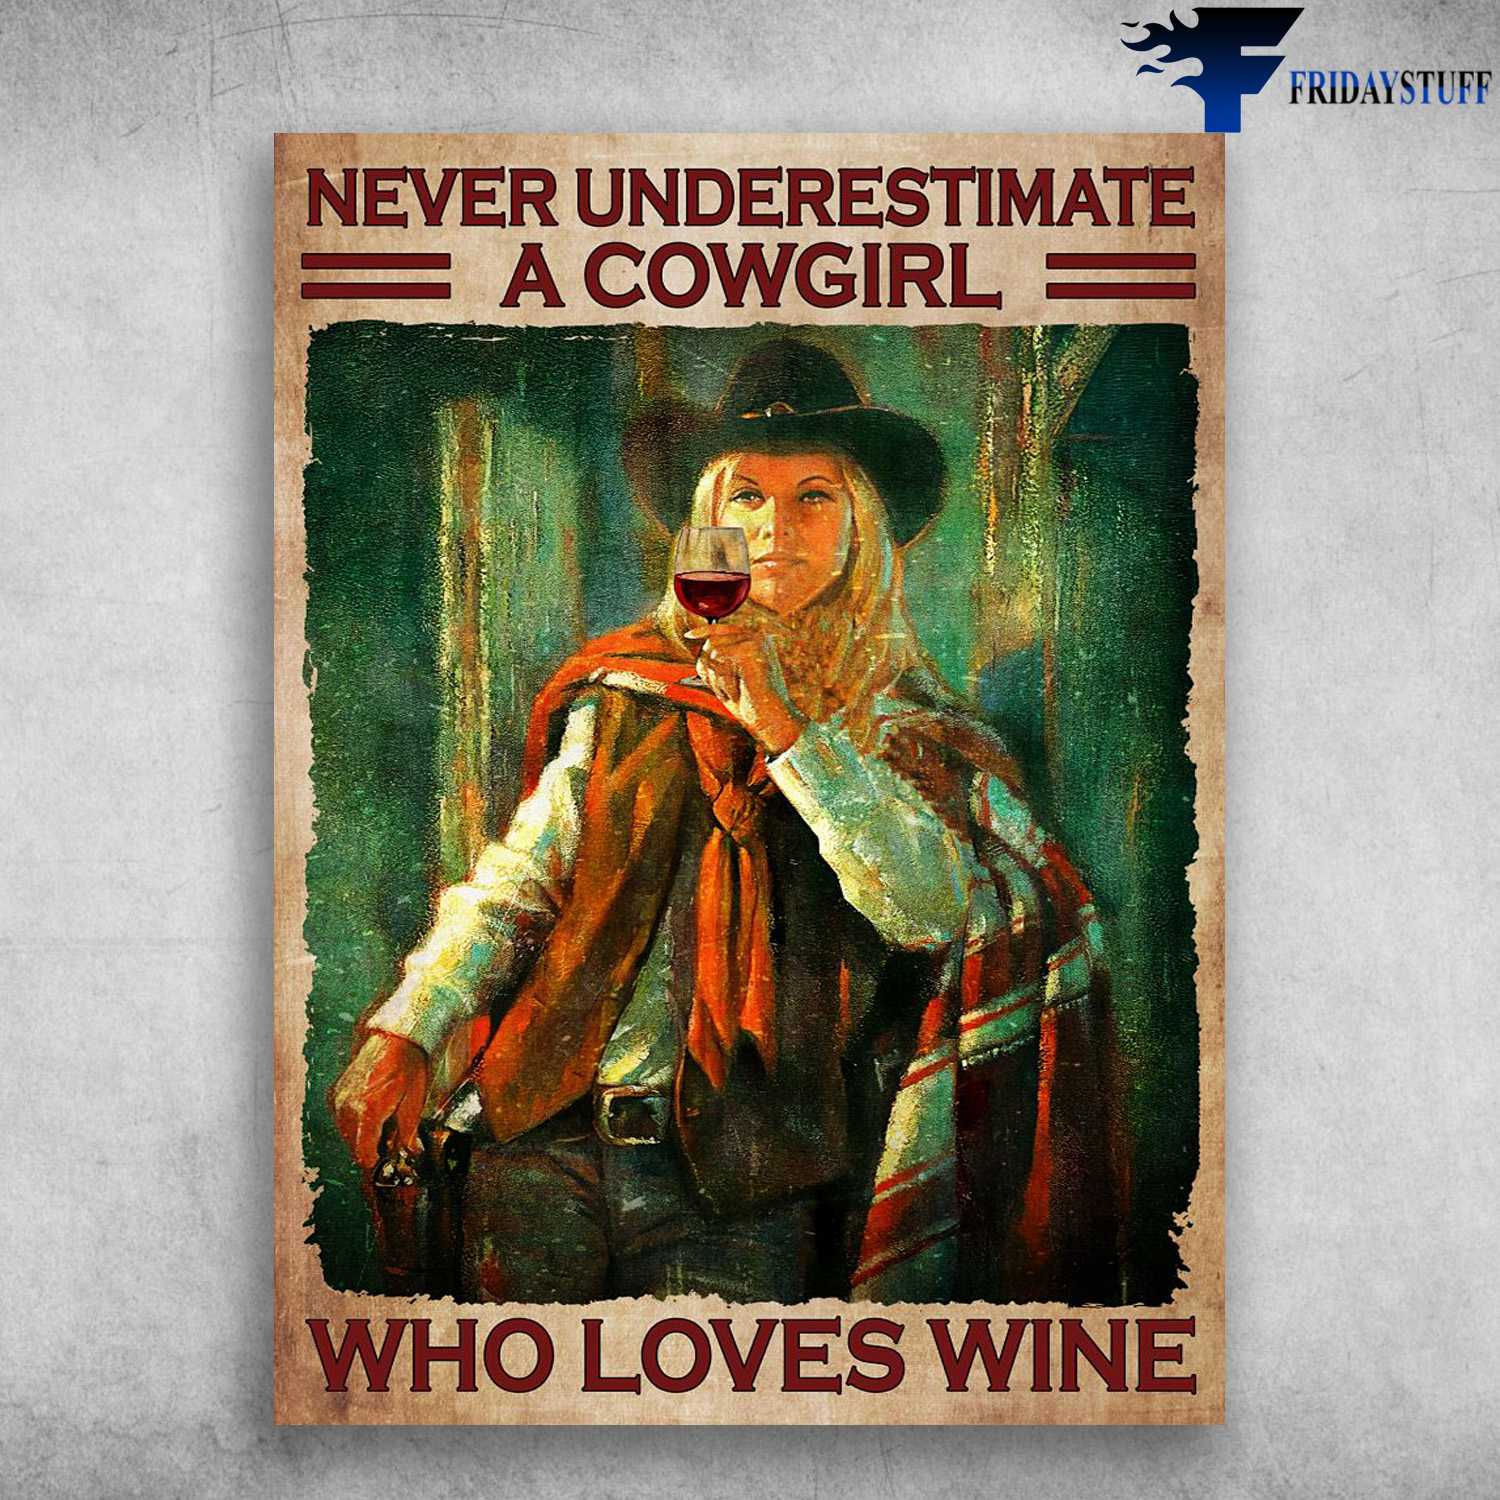 Cowgirl And Wine, Drink Wine - Never Underestimate A Cowgirl, Who Loves Wine